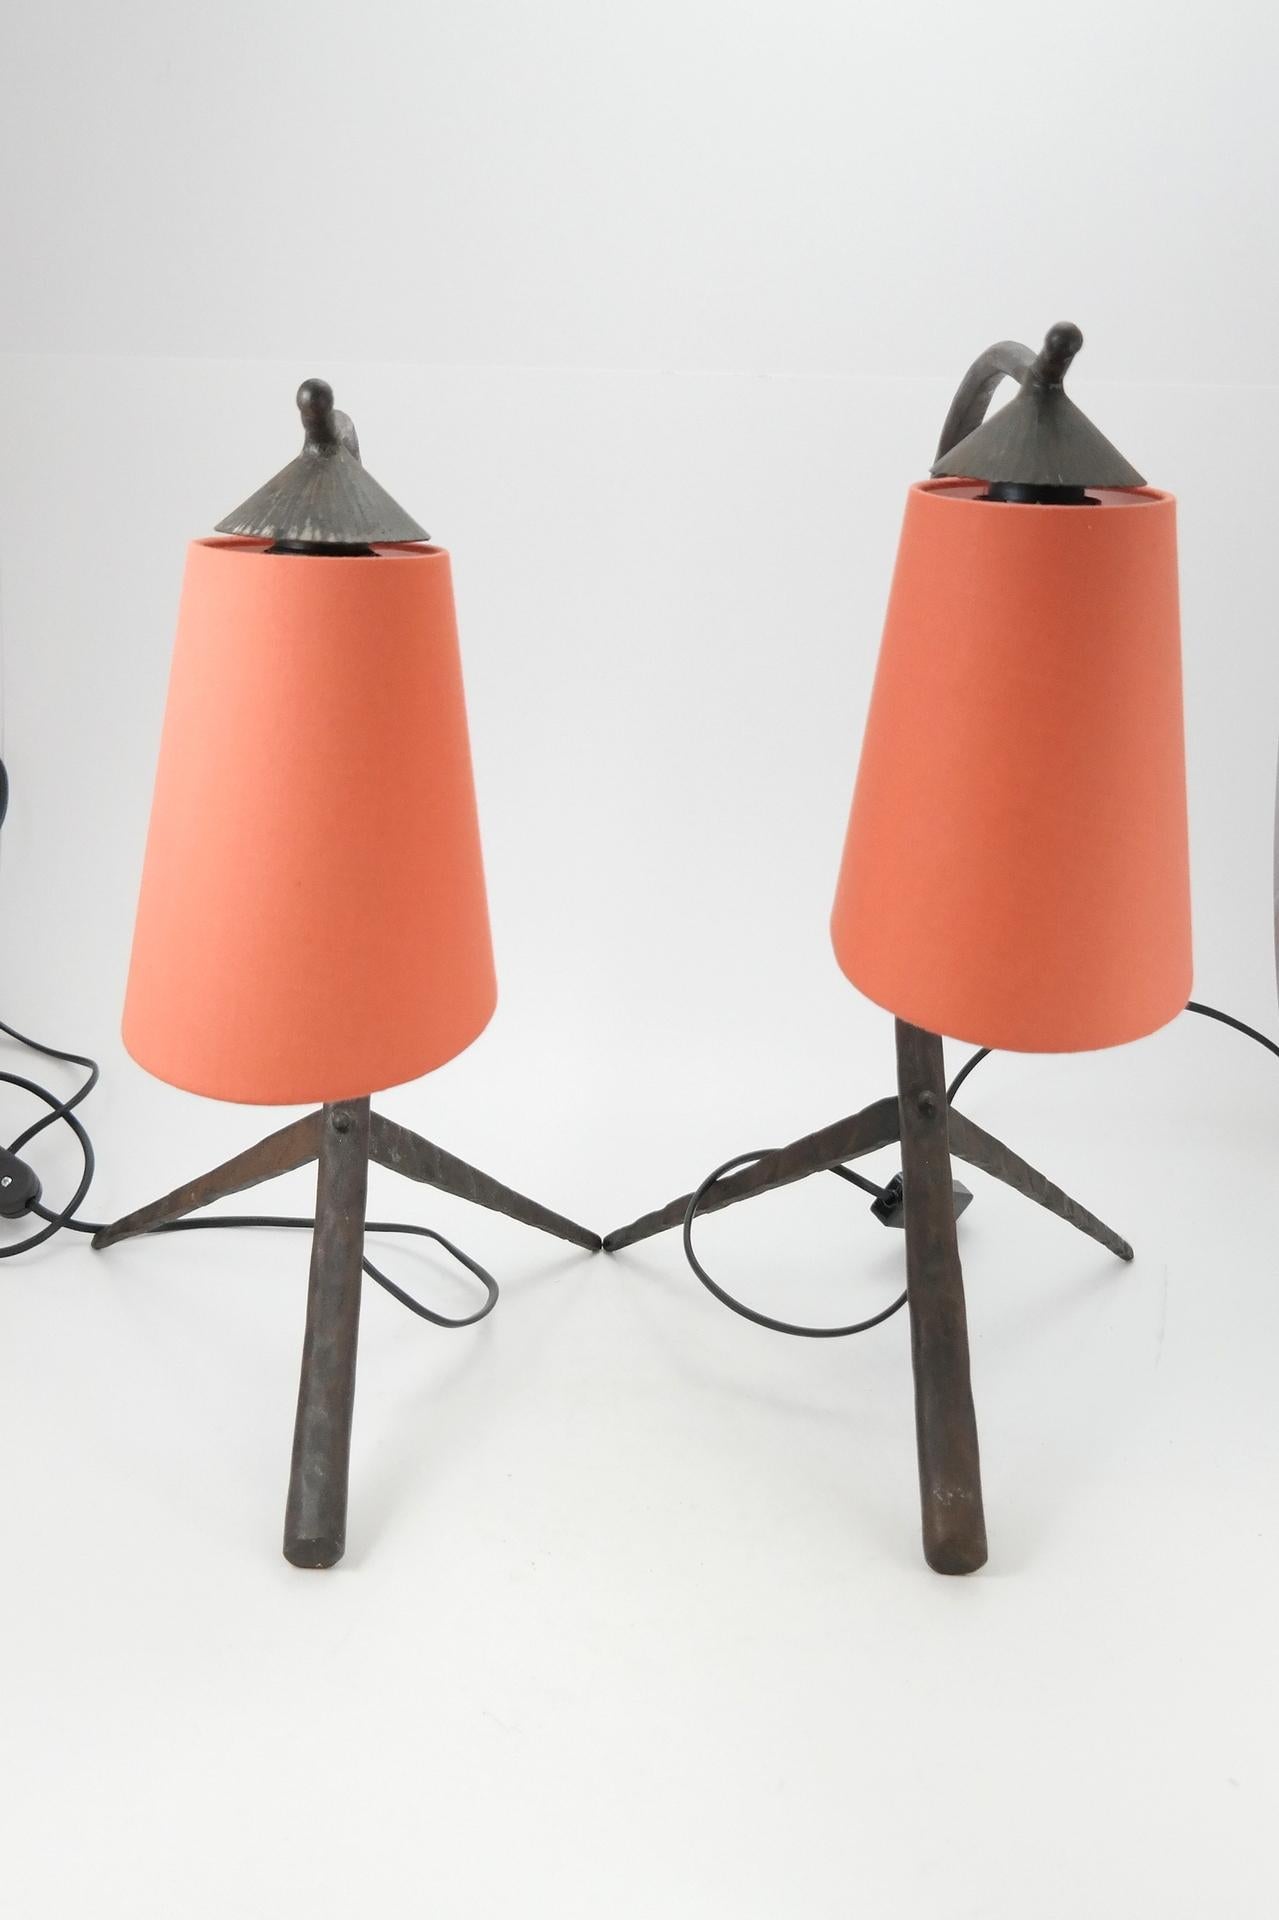 European Pair of Midcentury Hammered Wrought Iron Table Lamp with Coral Lampshade, 1970